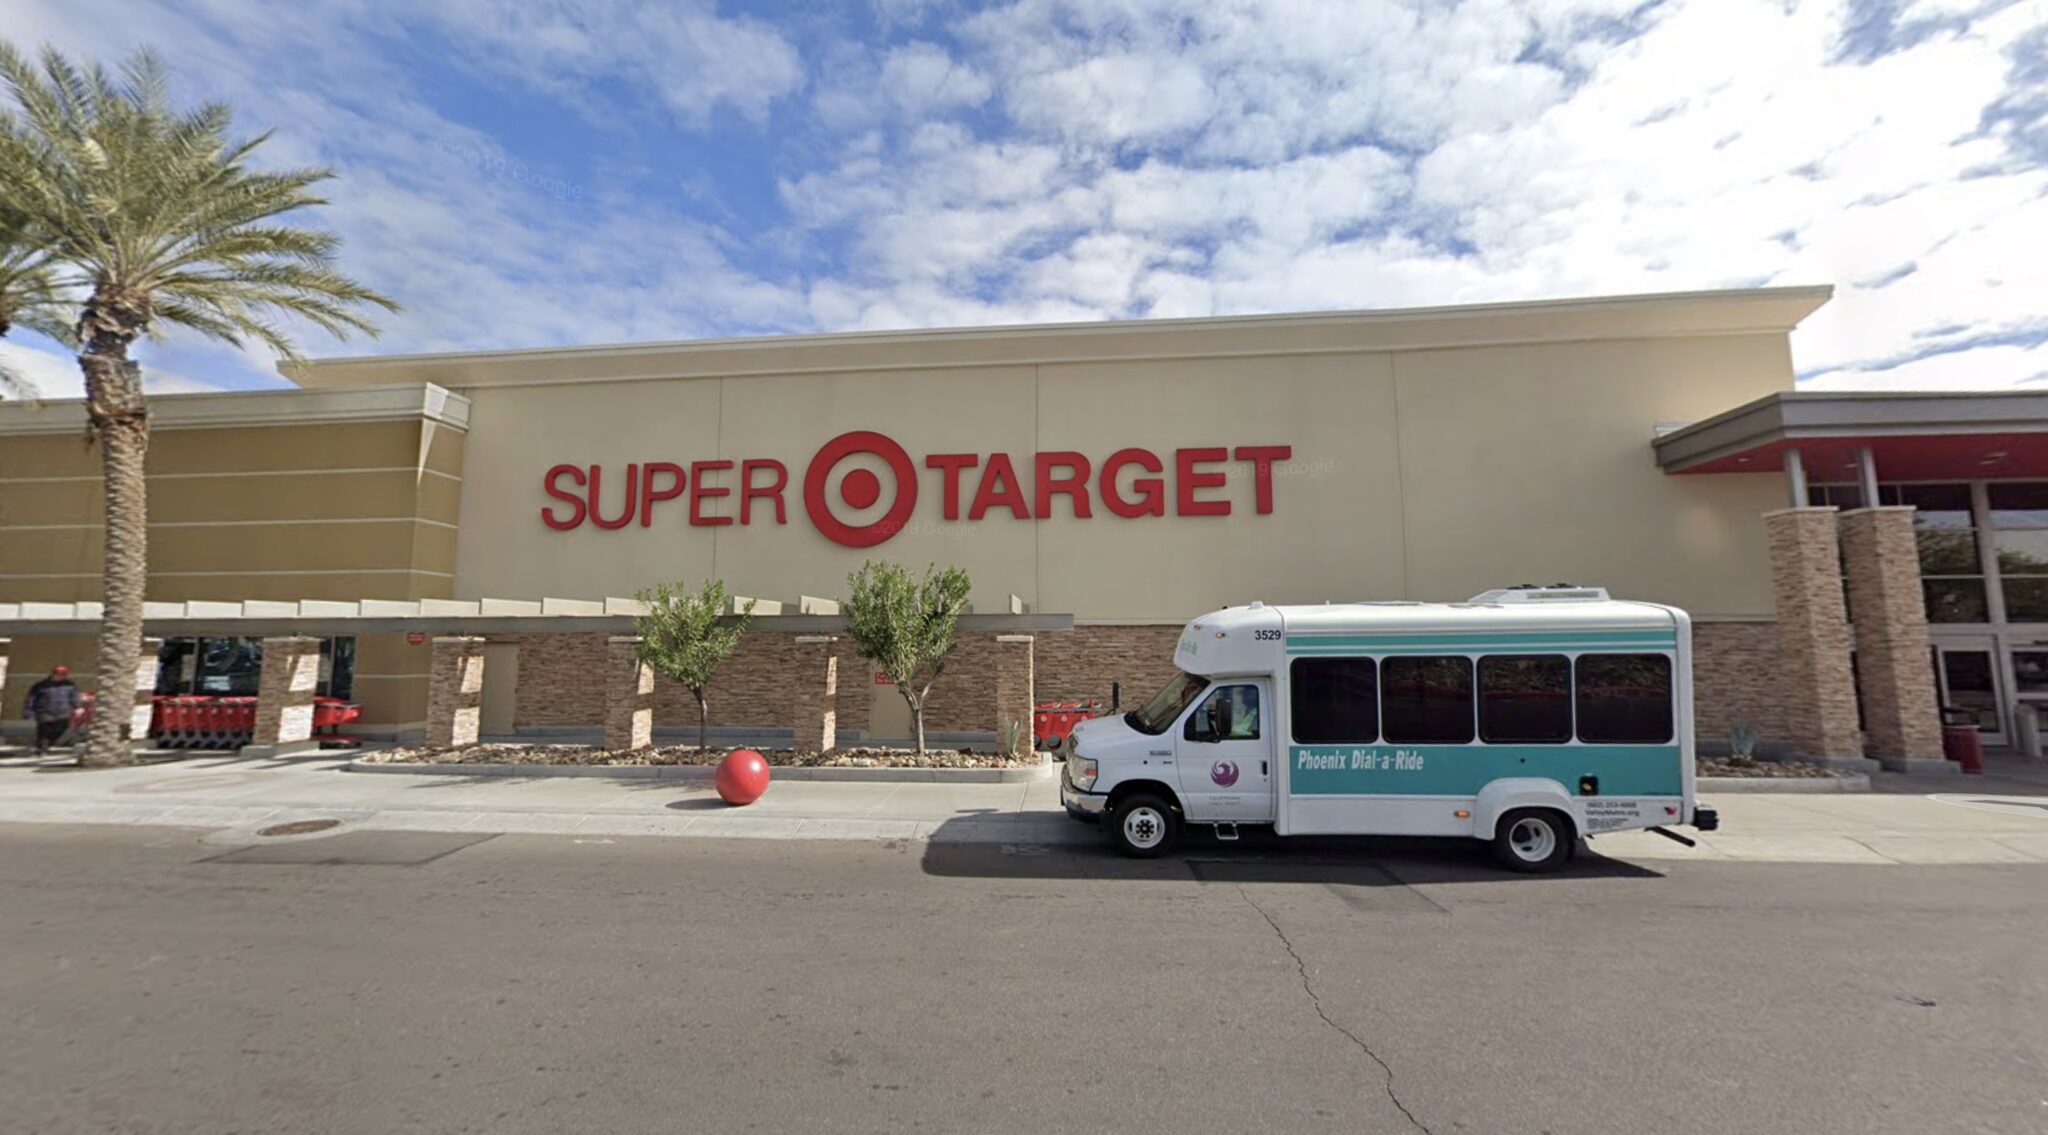 Target superstore victim of most thefts in huge mall as retail giant shuts 9 stores – and retailers take drastic action